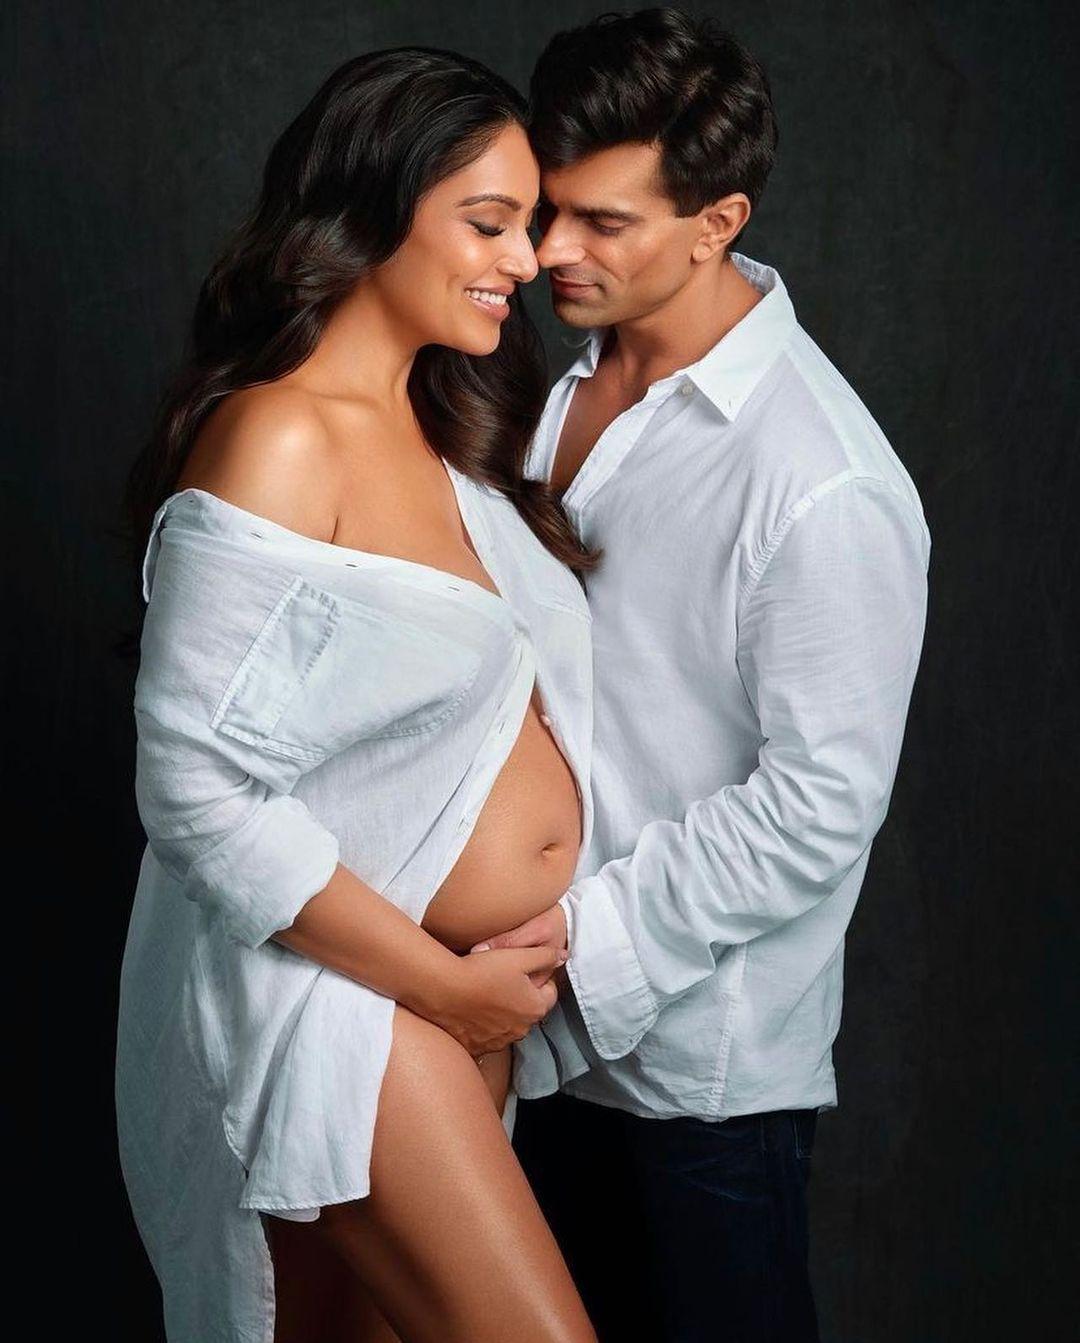 Clad in a shirt tastefully left unbuttoned to reveal her glowing bump, Bipasha radiates pure joy, while her husband's tender gaze reflects their shared excitement.